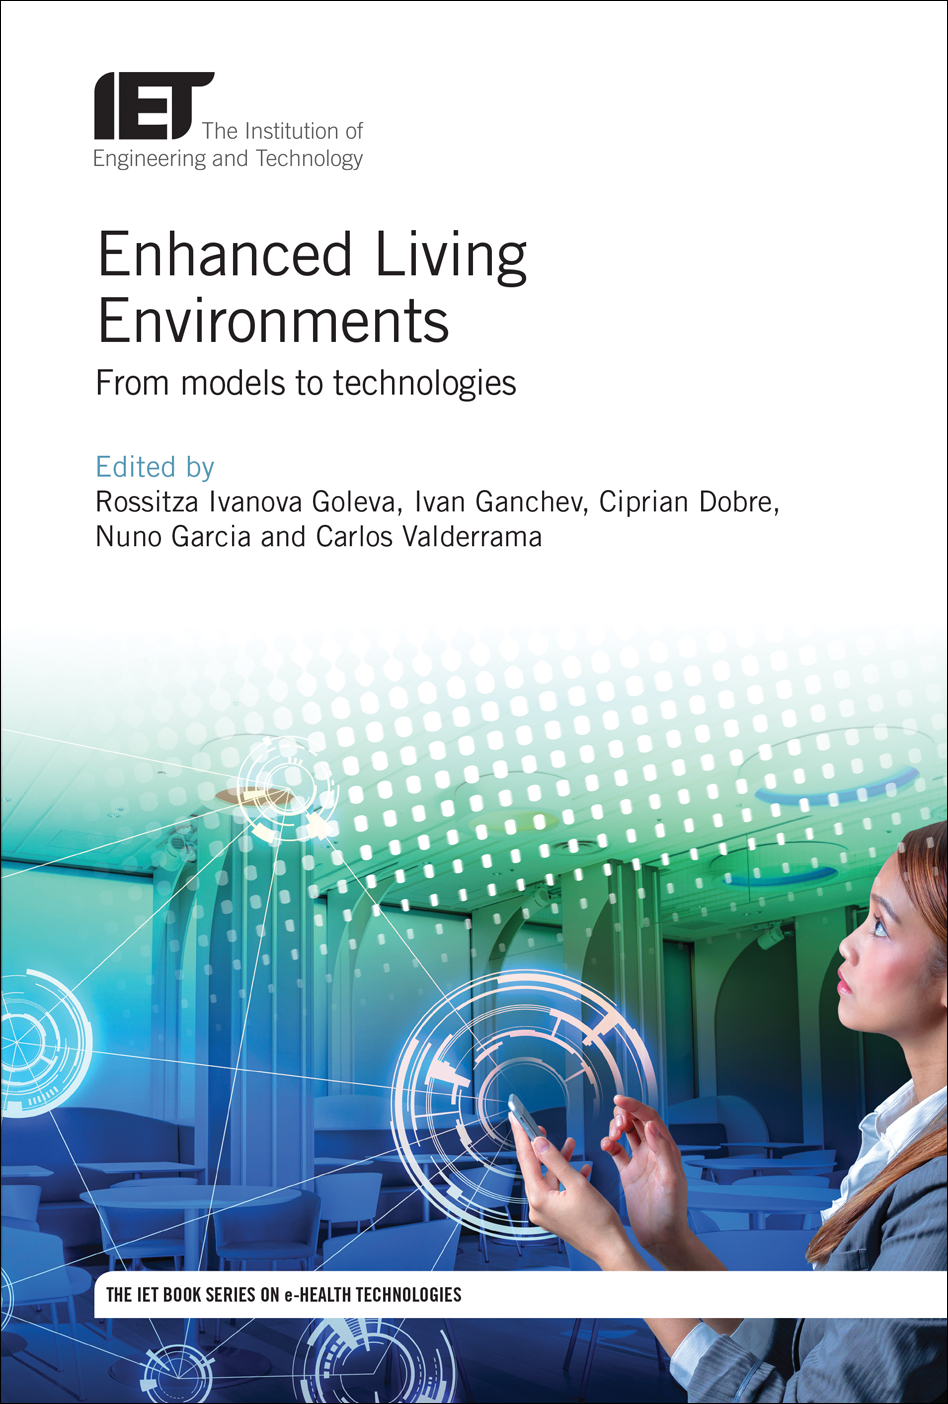 Enhanced Living Environments, From models to technologies